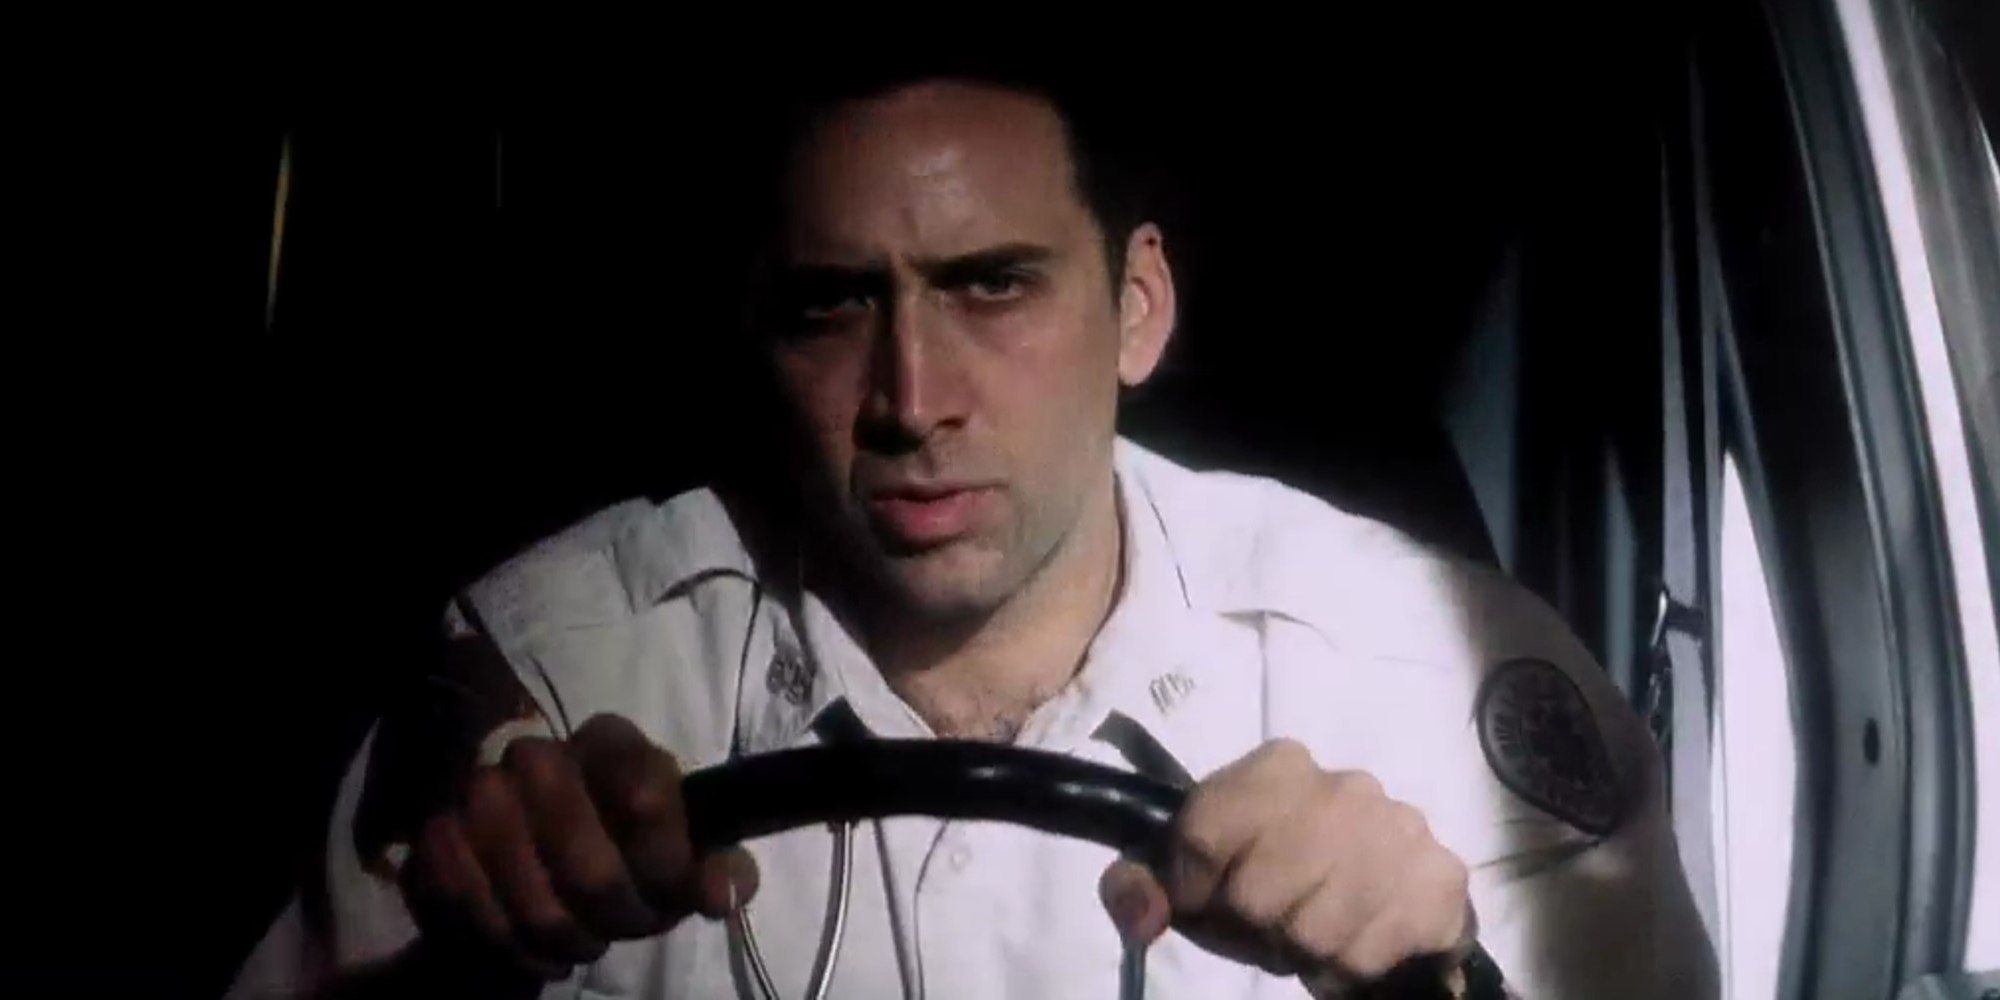 Nicholas Cage in Bringing Out the Dead